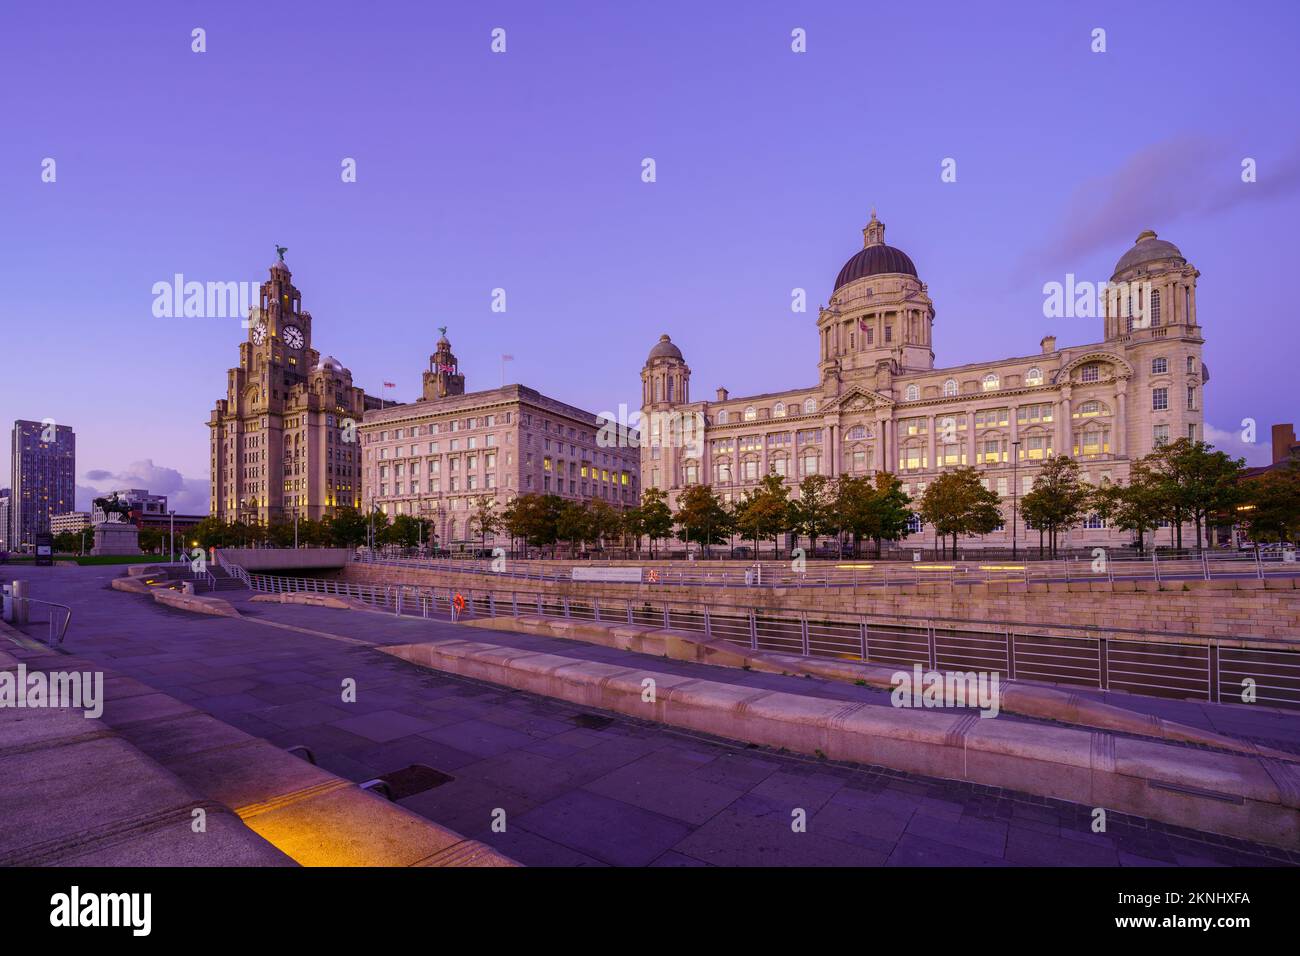 Liverpool, UK - October 07, 2022: Evening view of the Royal Liver Building, the Cunard Building, and the Port of Liverpool Building, in Liverpool, Mer Stock Photo